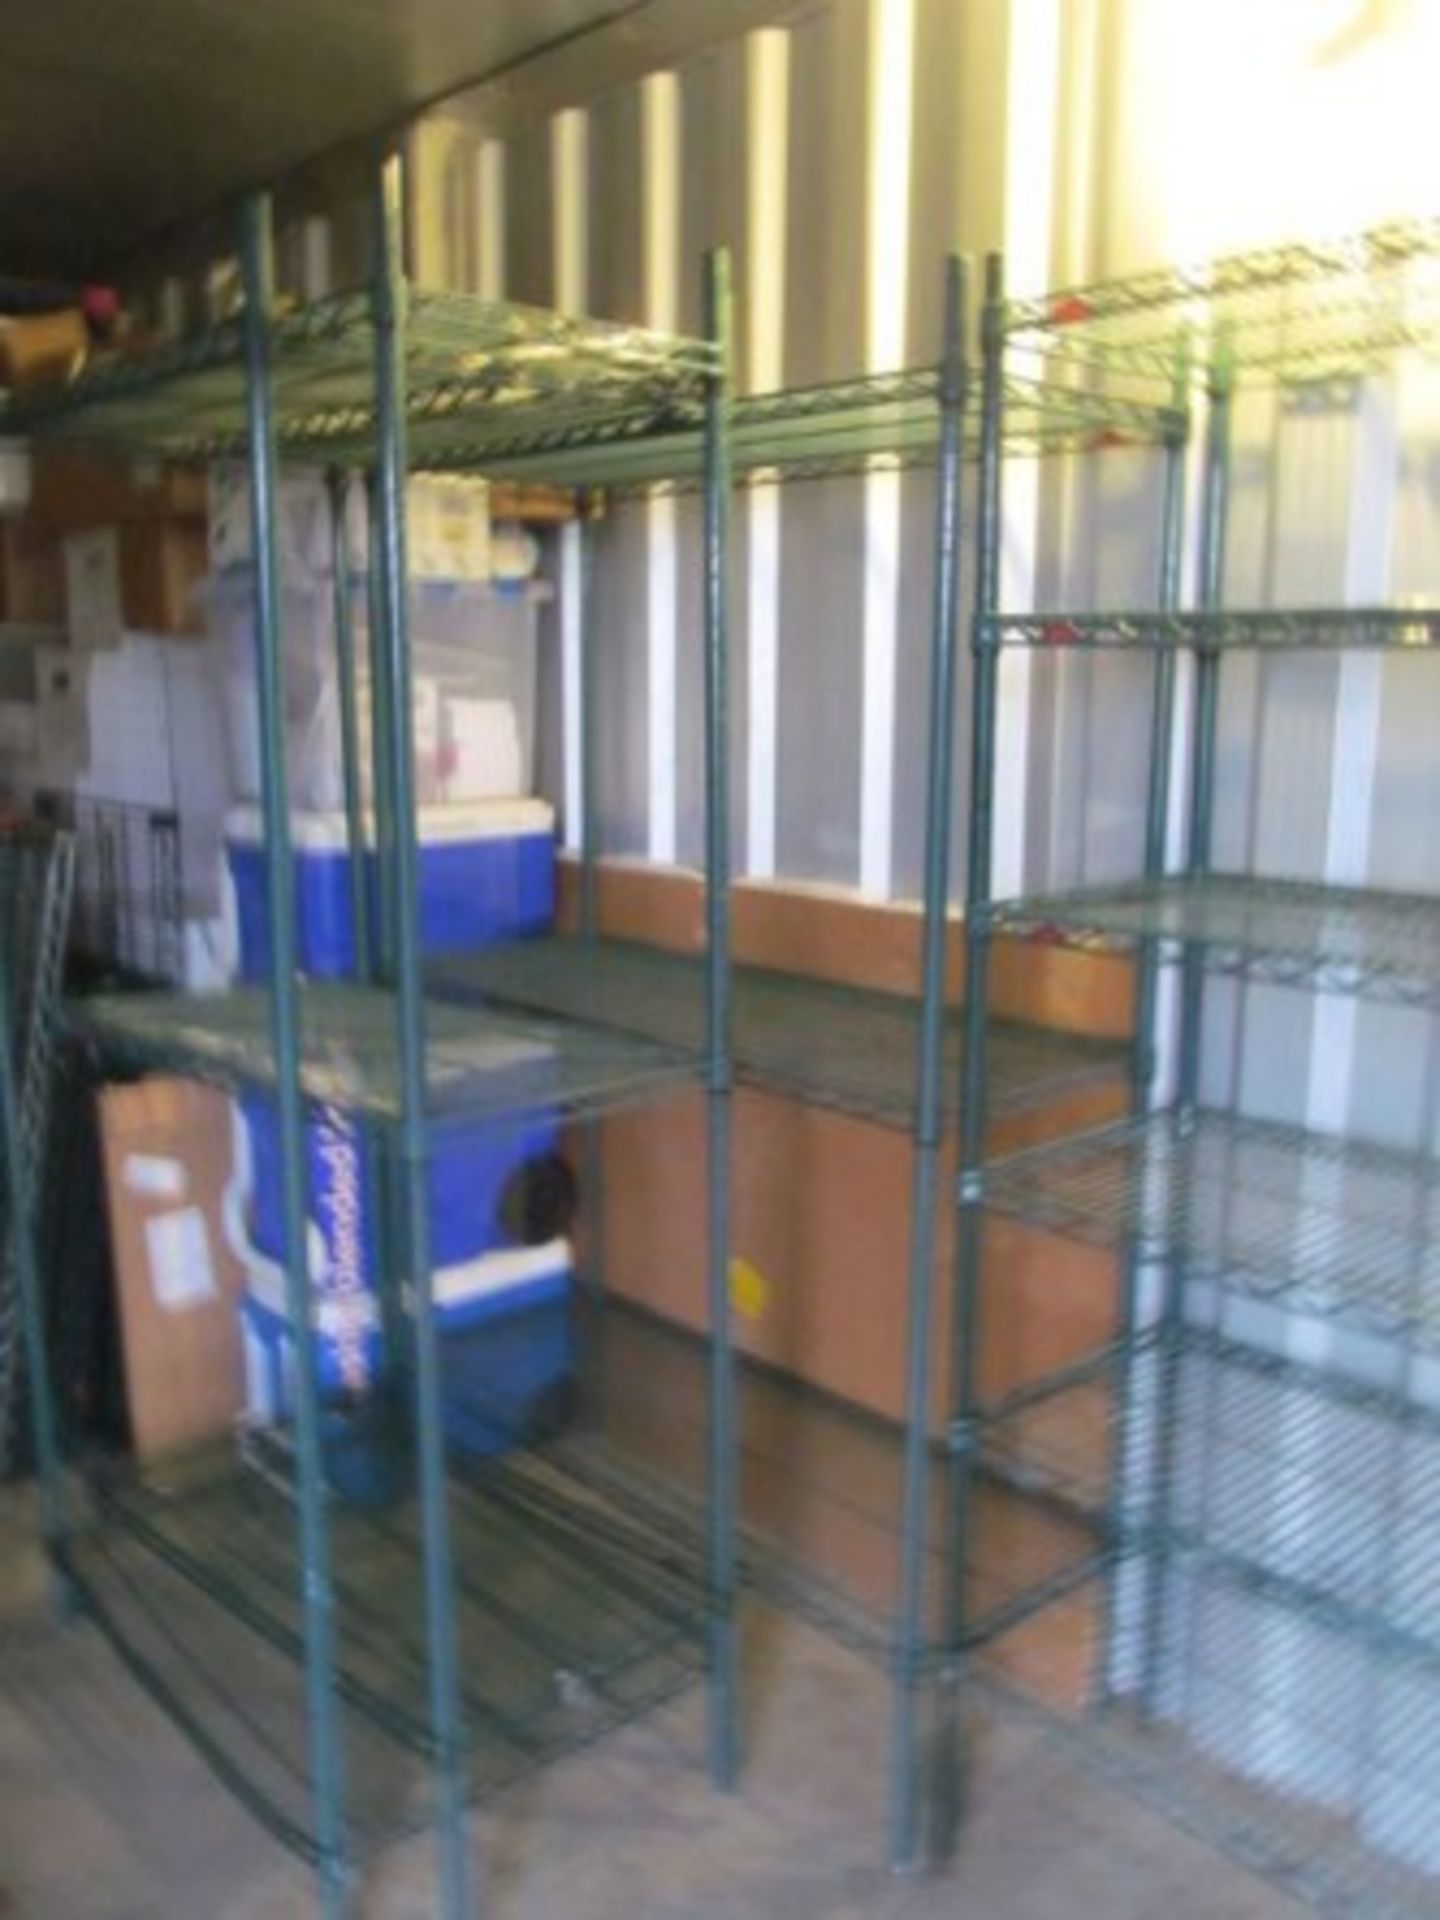 Lot of Metro Shelving From Walk-ins - Image 6 of 6